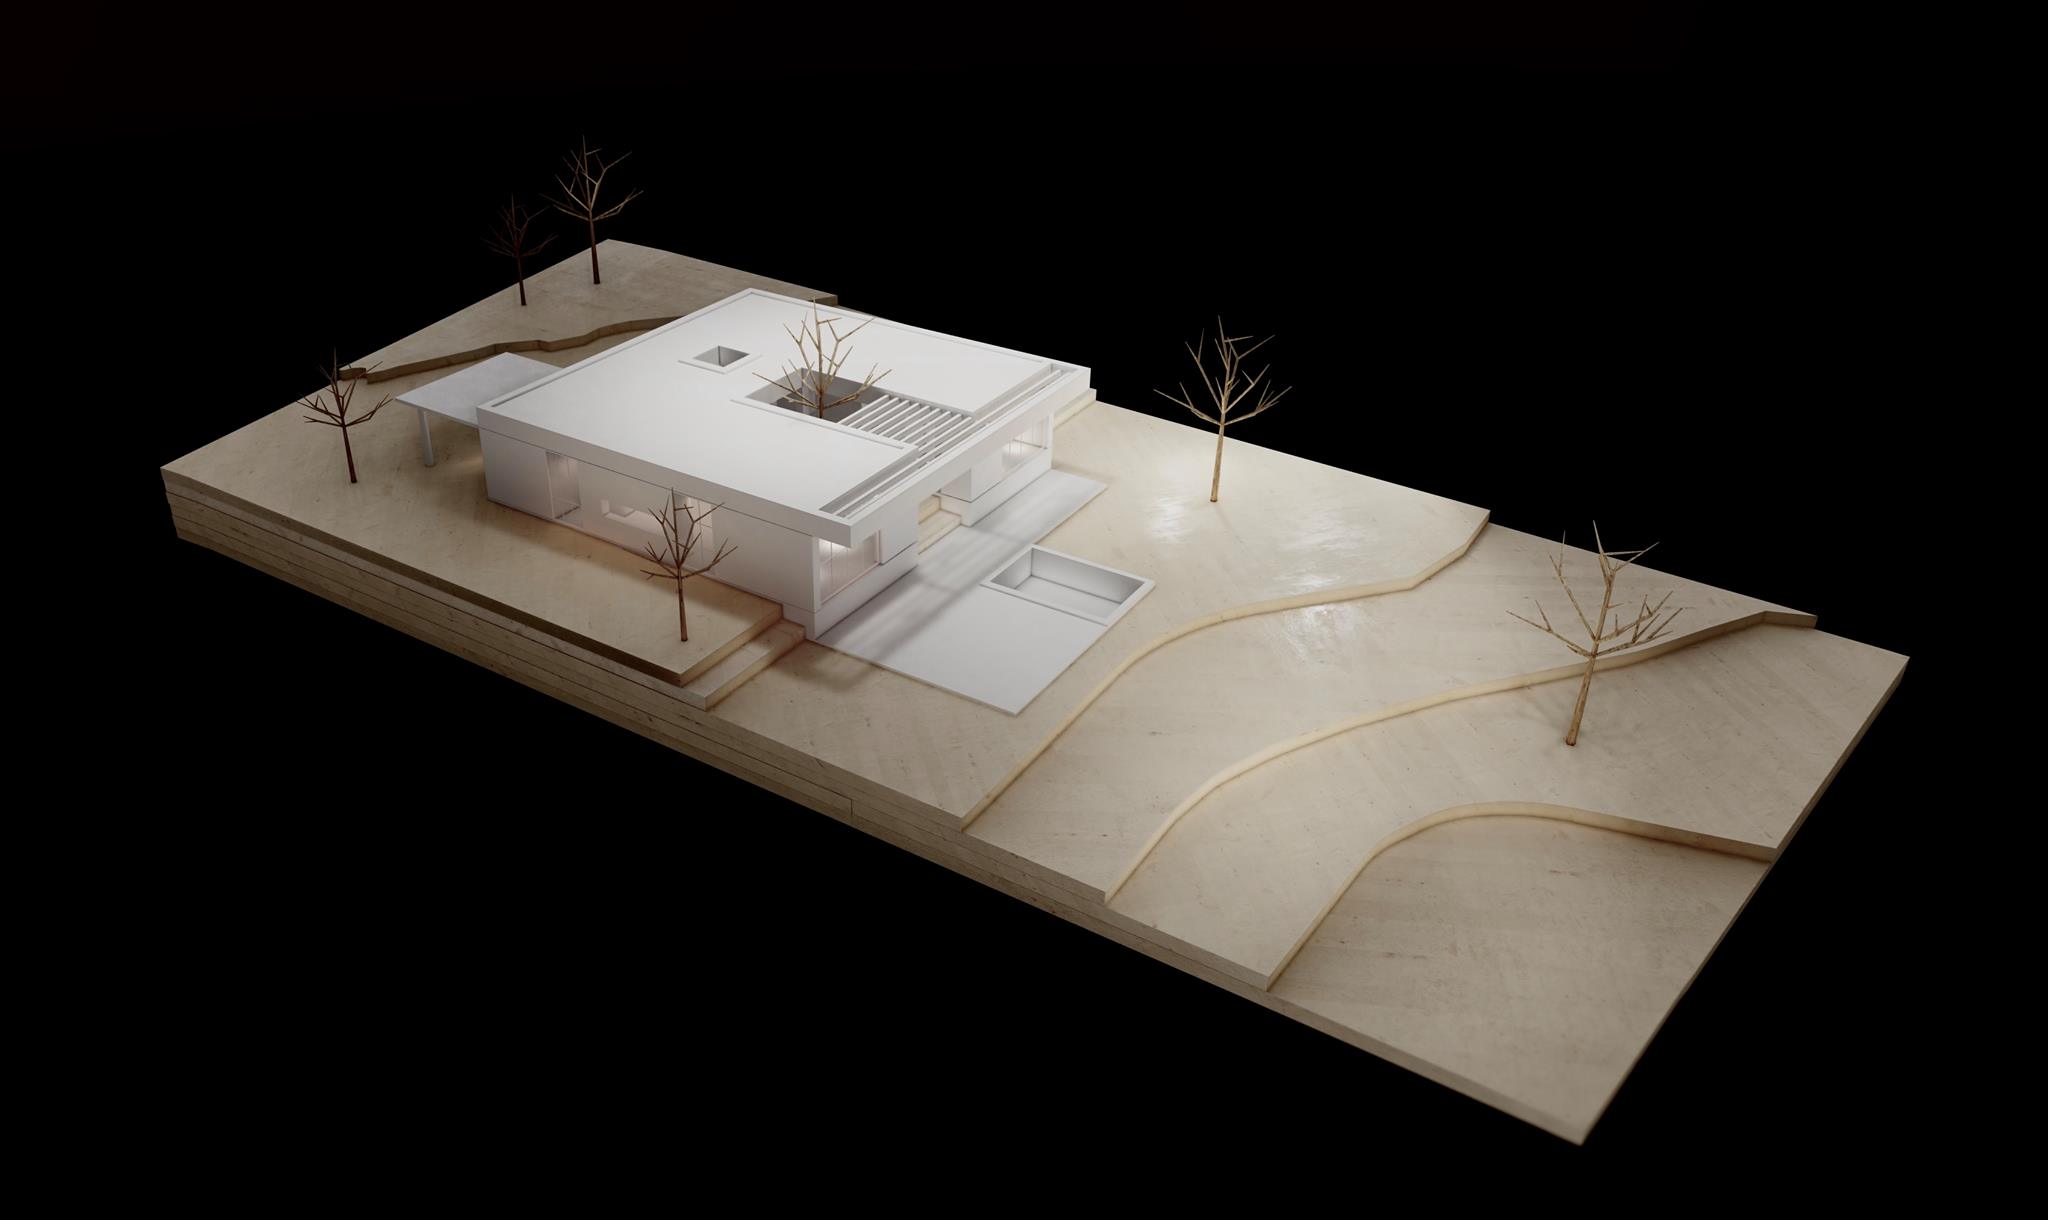 Architectural model, rendered in Lumion 10.3 by Carlos F. Marques.